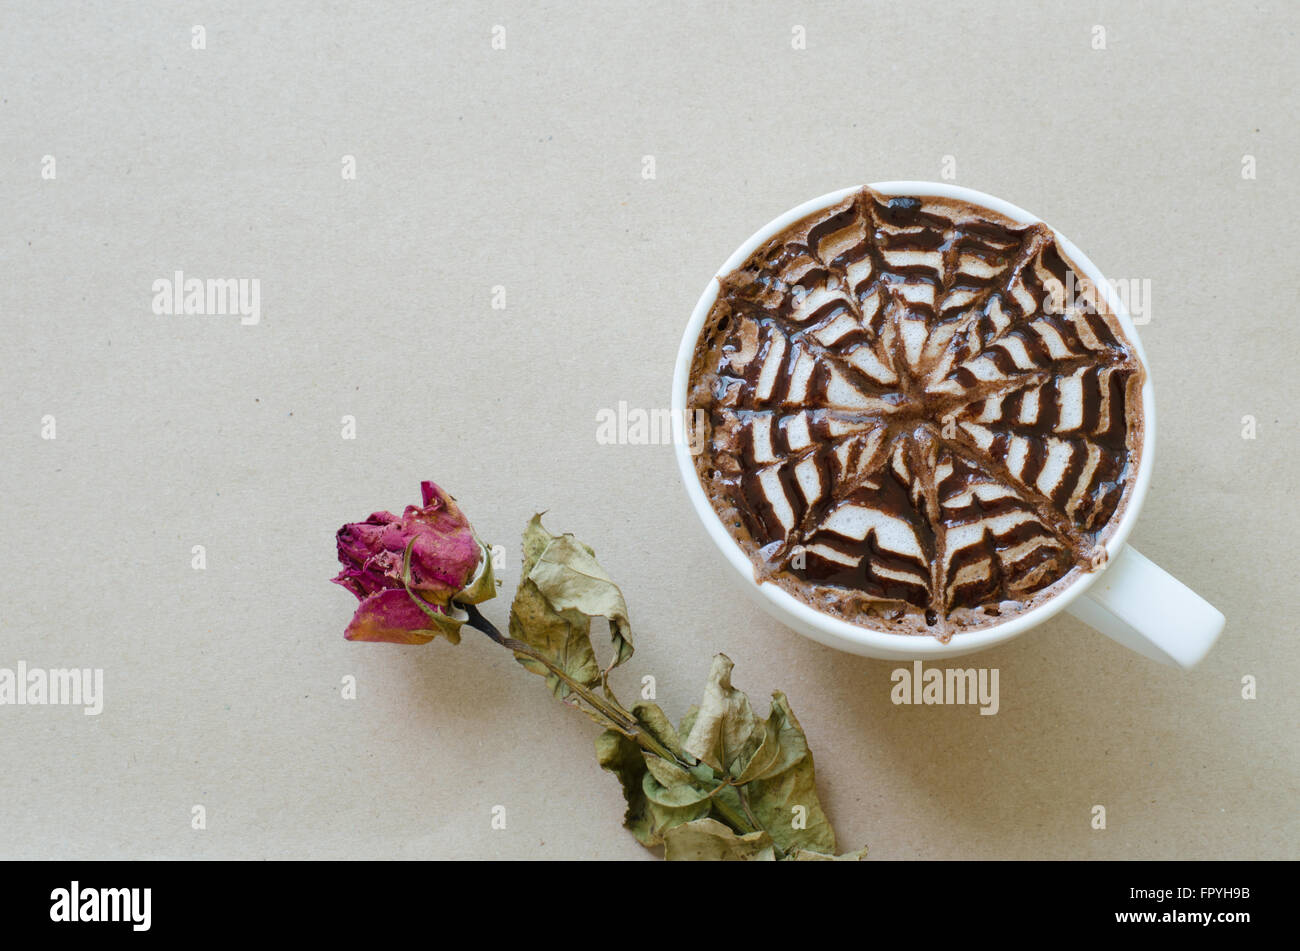 A cup of coffee with latte art and wither rose on brown paper background Stock Photo